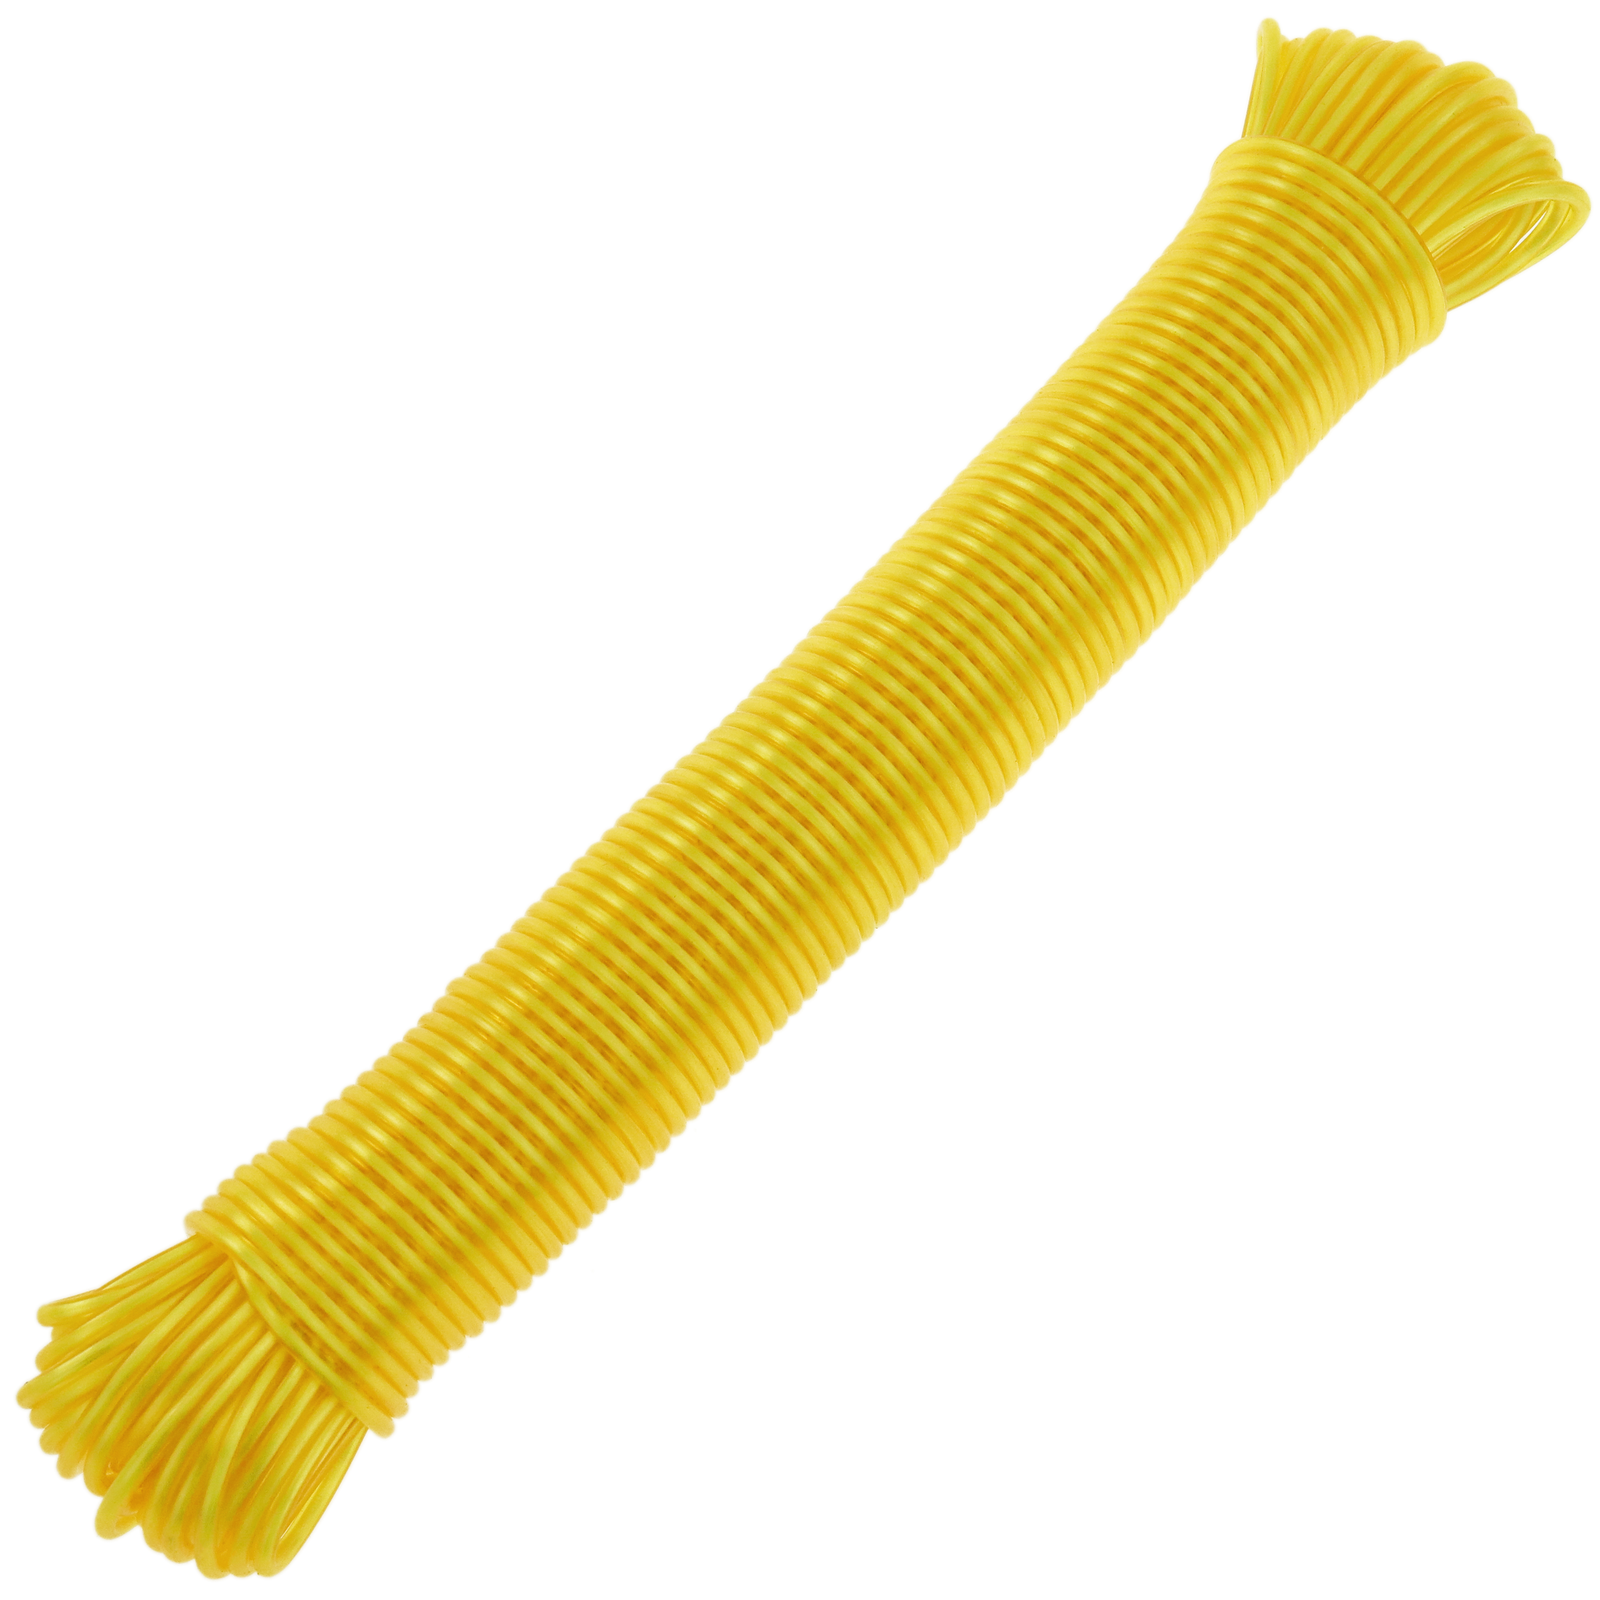 Clothesline rope PVC with polypropylene core 20 m x 3 mm yellow - Cablematic